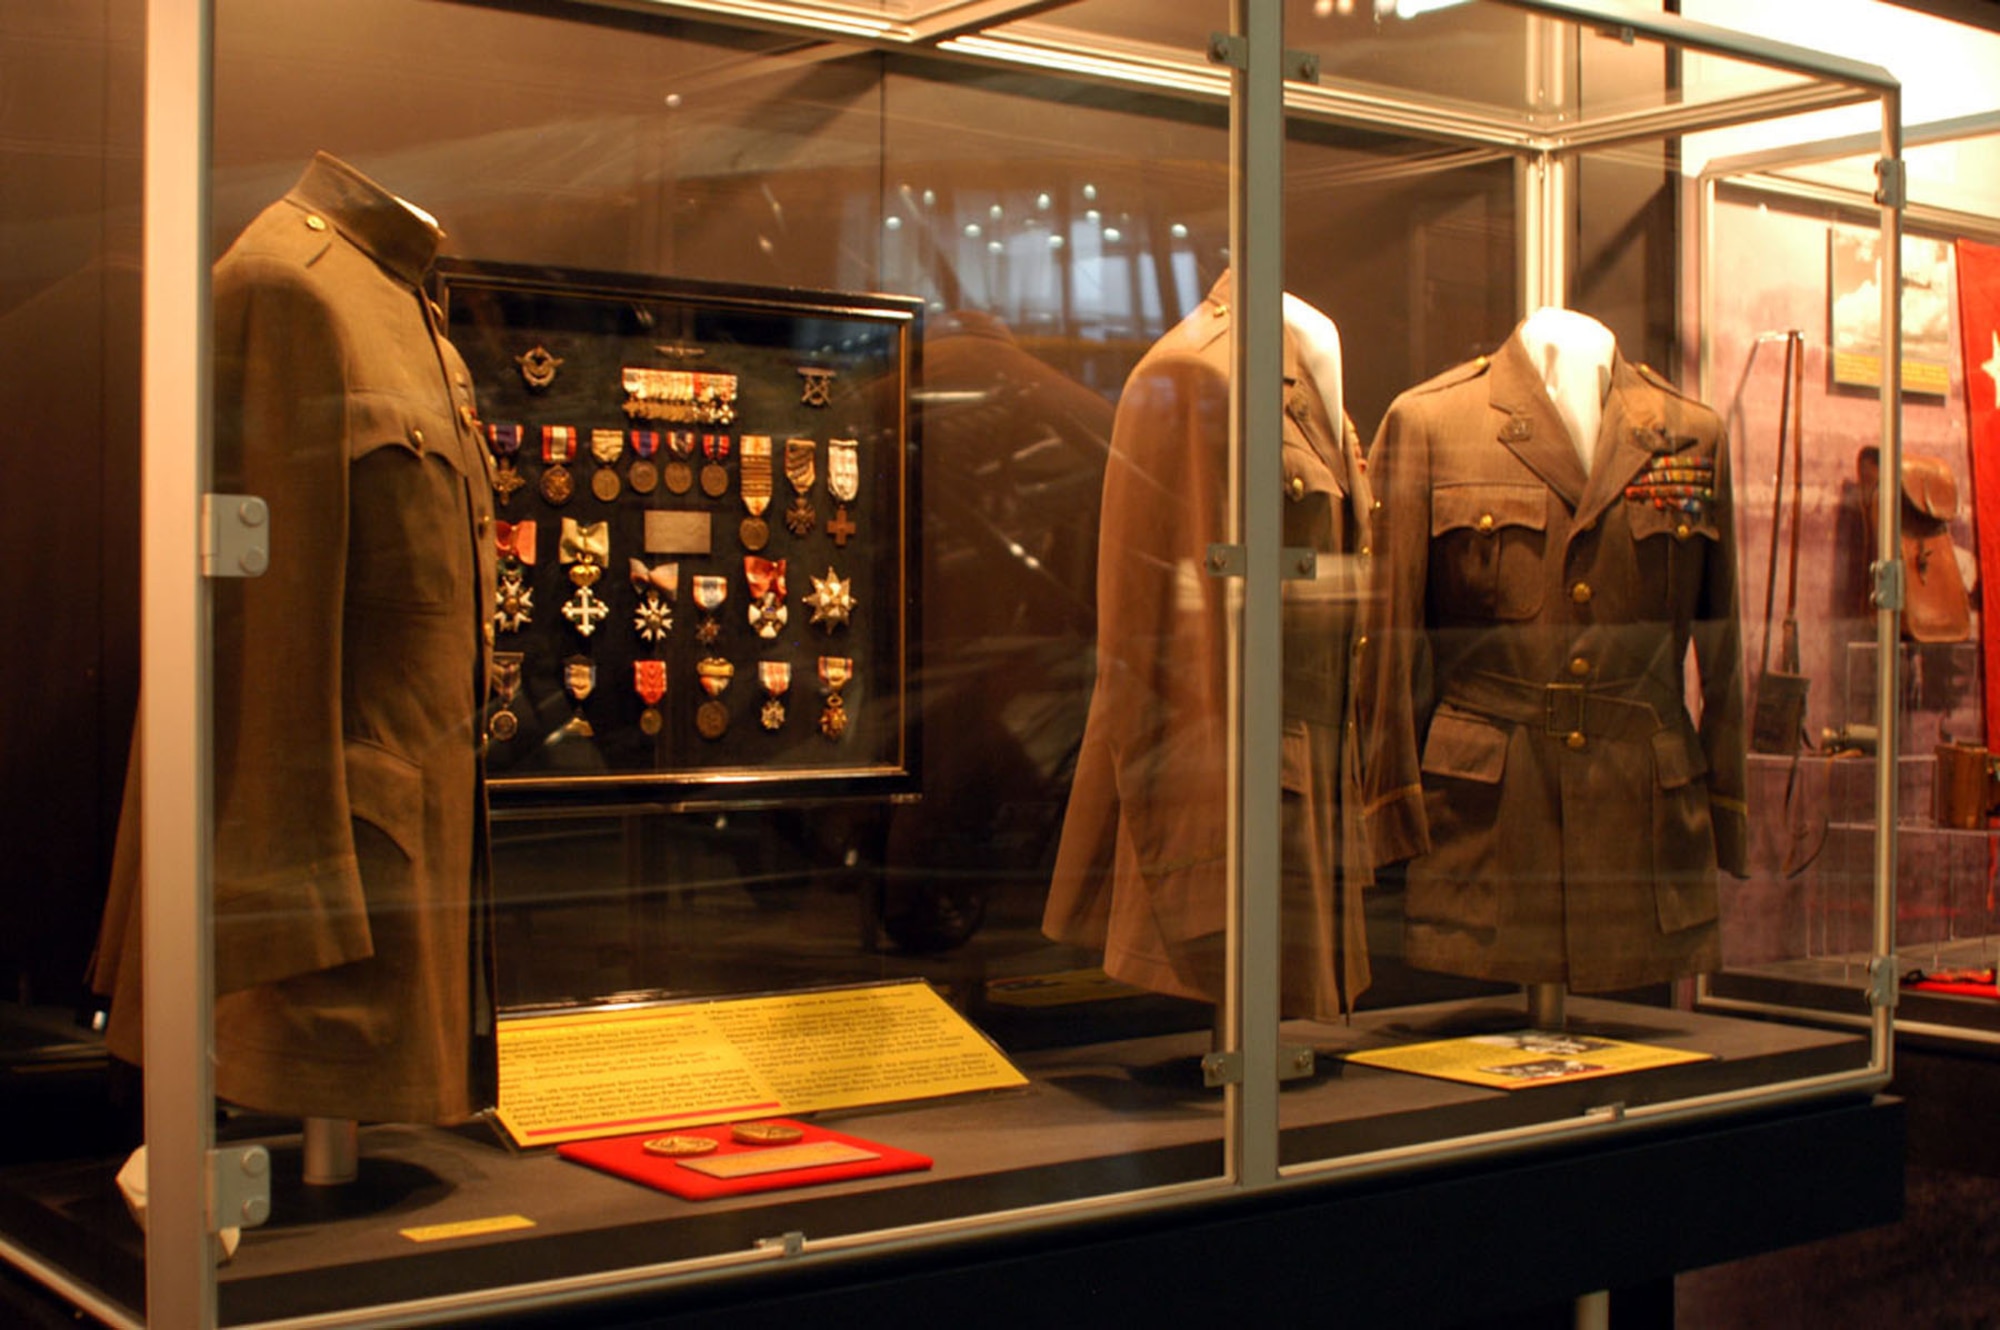 DAYTON, Ohio -- Gen. Billy Mitchell uniforms and medals on display in the National Museum of the United States Air Force Early Years Gallery. (U.S. Air Force photo)